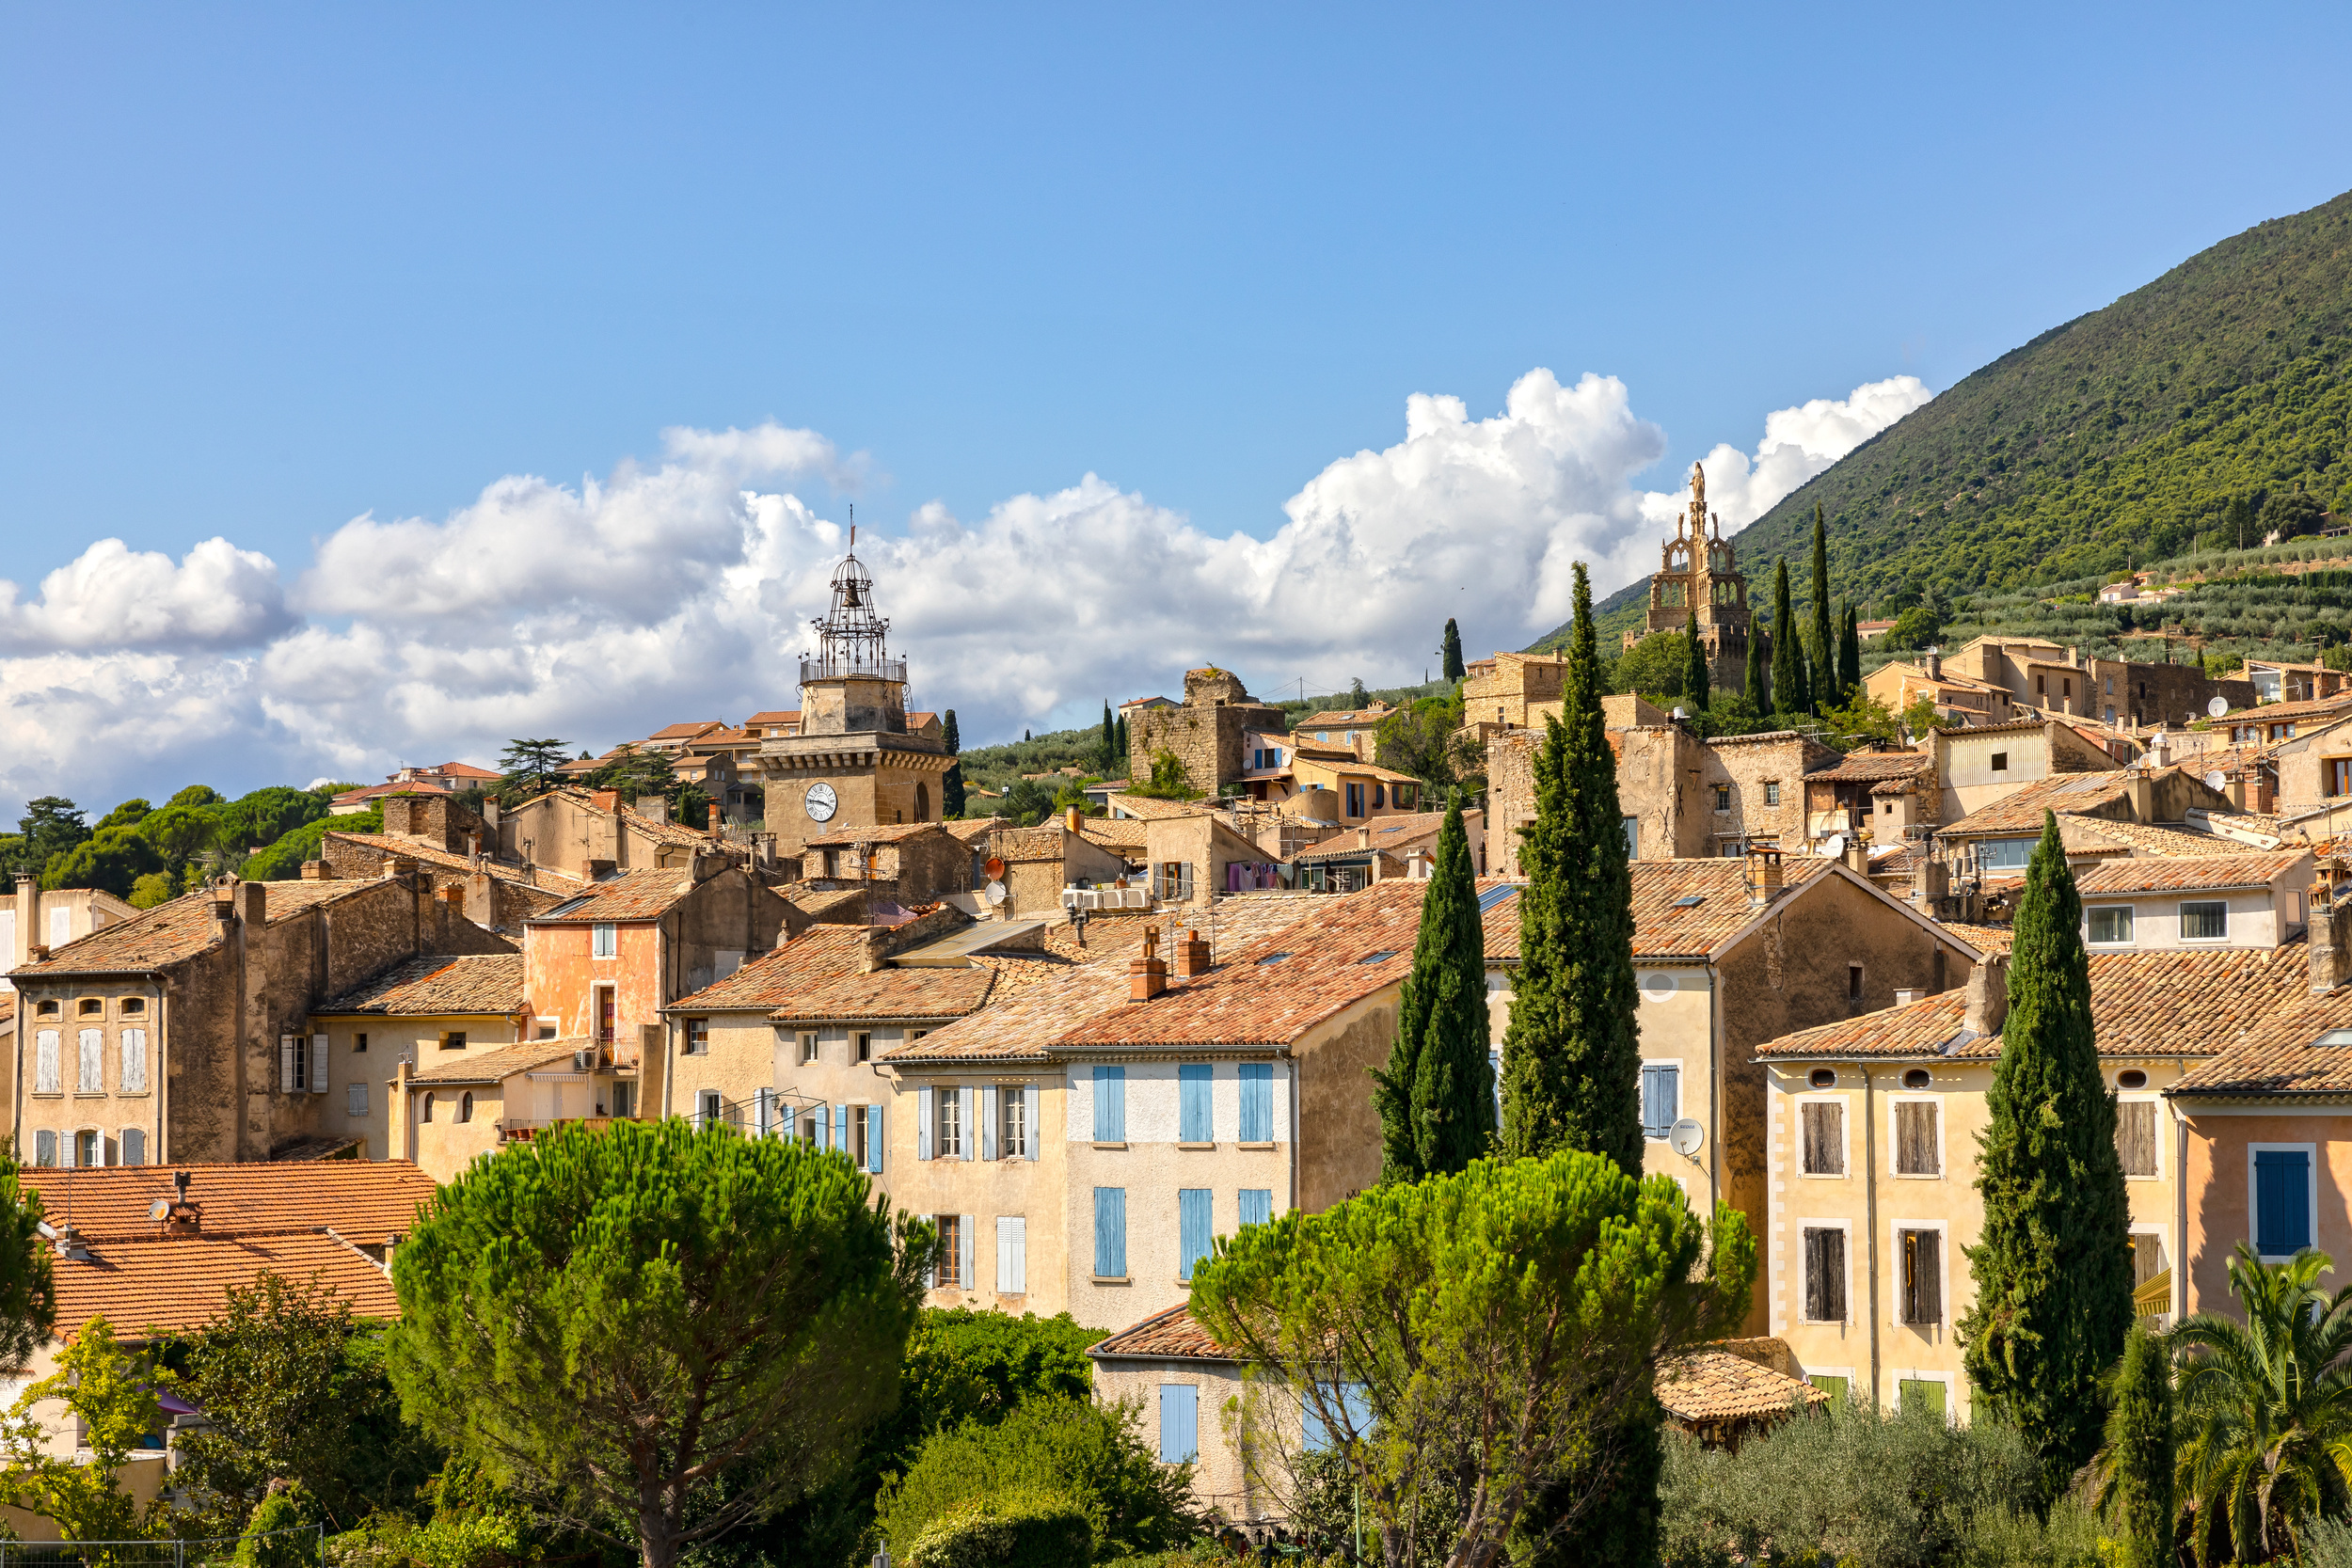 <p>As far east into the mountains as you can go and still be in Provence, Nyons is known as “la ville du soleil” or the “sun city.” So, most days, you’ll be graced by its presence. It's also a great hiking destination for all levels.</p><p><a href='https://www.msn.com/en-us/community/channel/vid-cj9pqbr0vn9in2b6ddcd8sfgpfq6x6utp44fssrv6mc2gtybw0us'>Follow us on MSN to see more of our exclusive lifestyle content.</a></p>